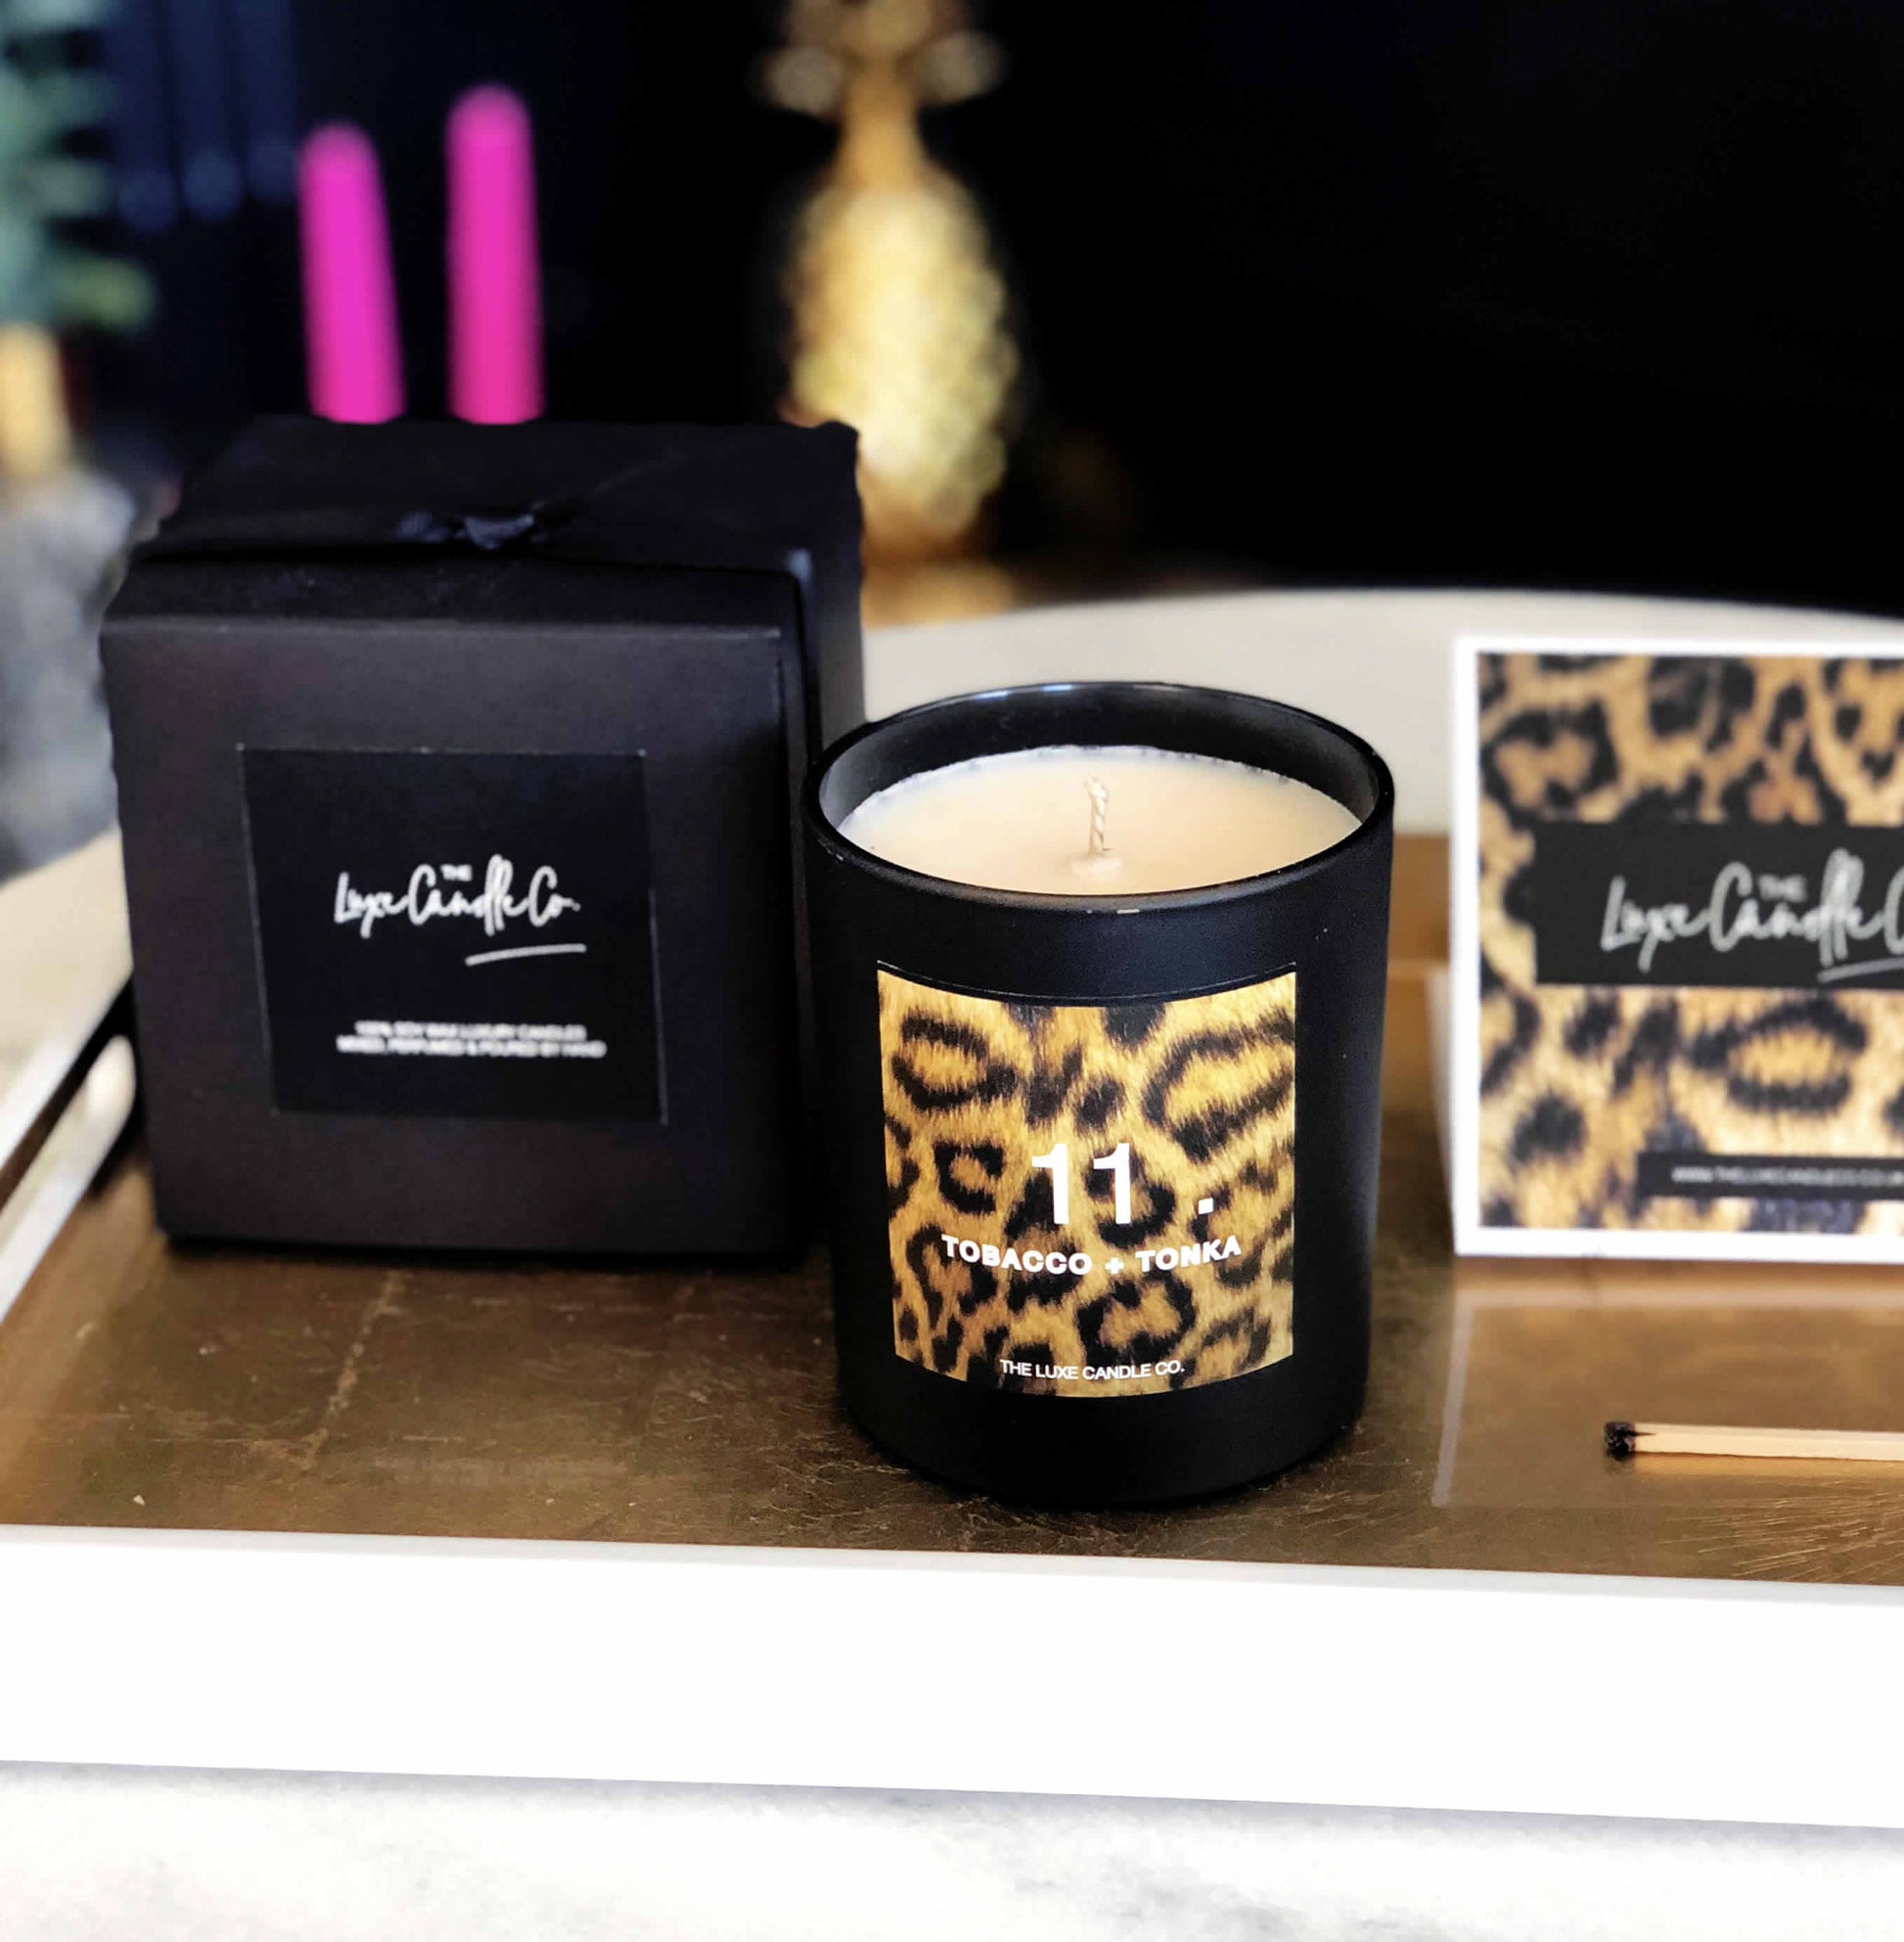 Leopard print home accessory - Luxe candle in black and animal print